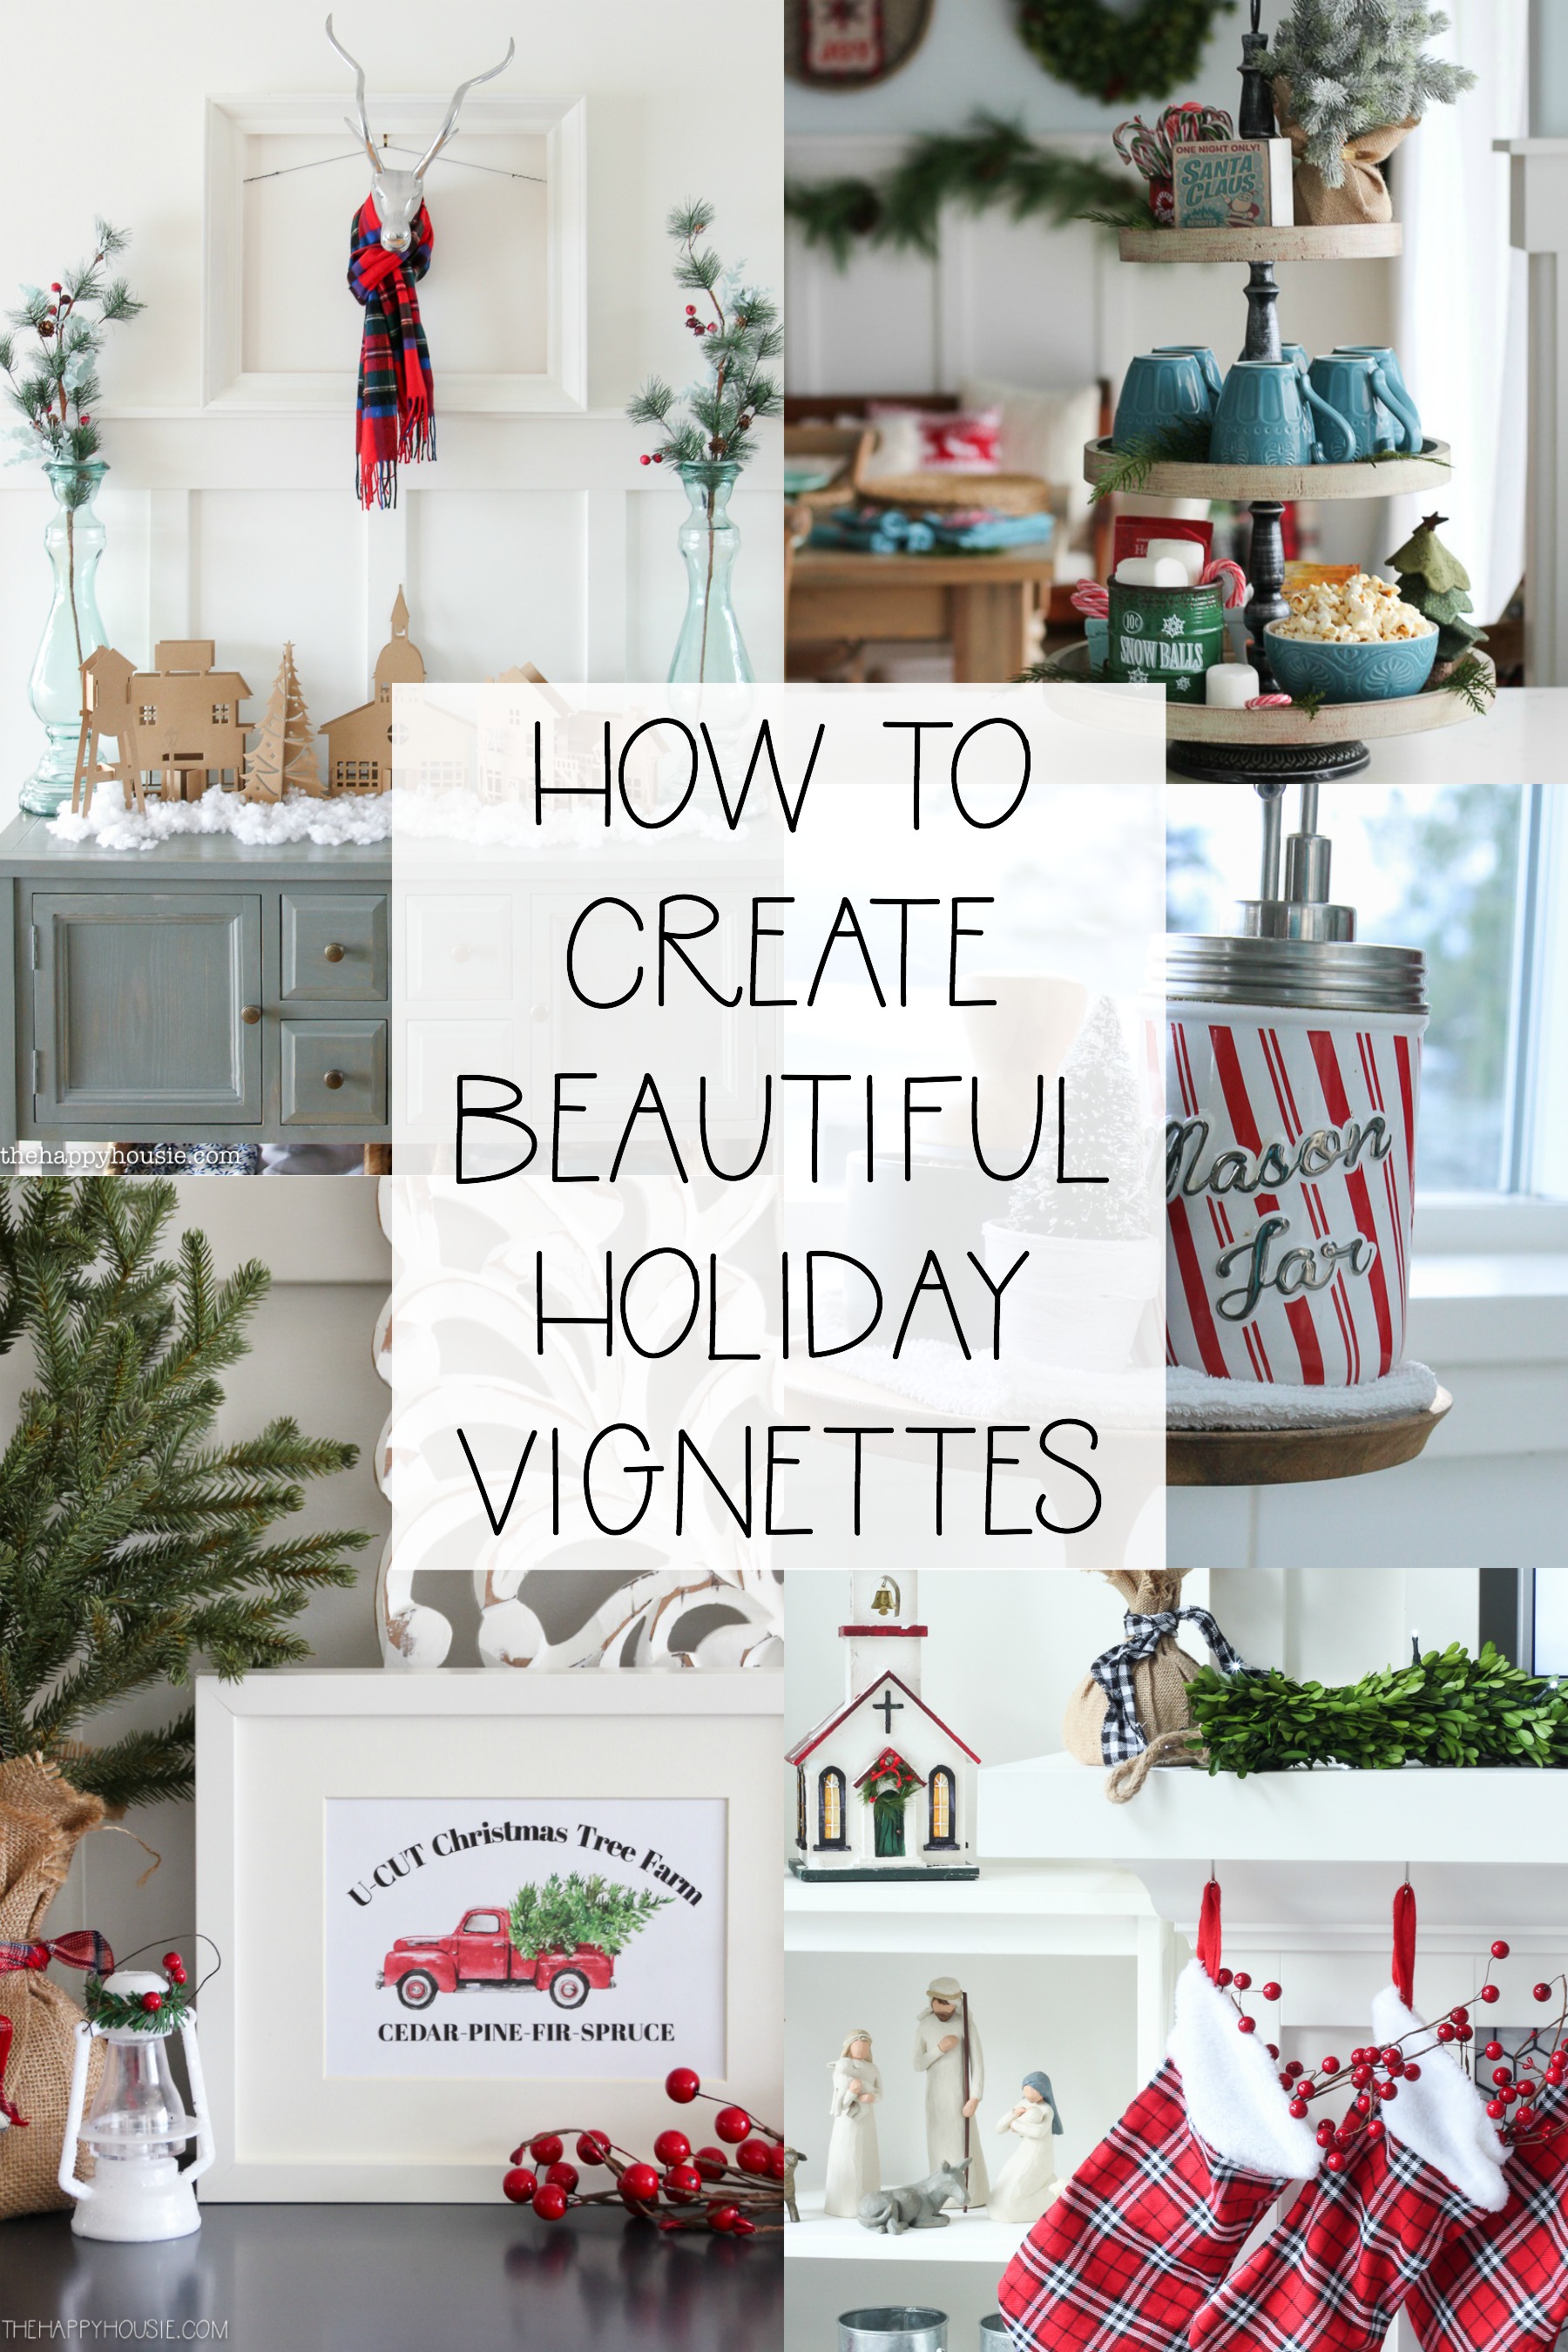 How To Create Beautiful Holiday Vignettes poster.